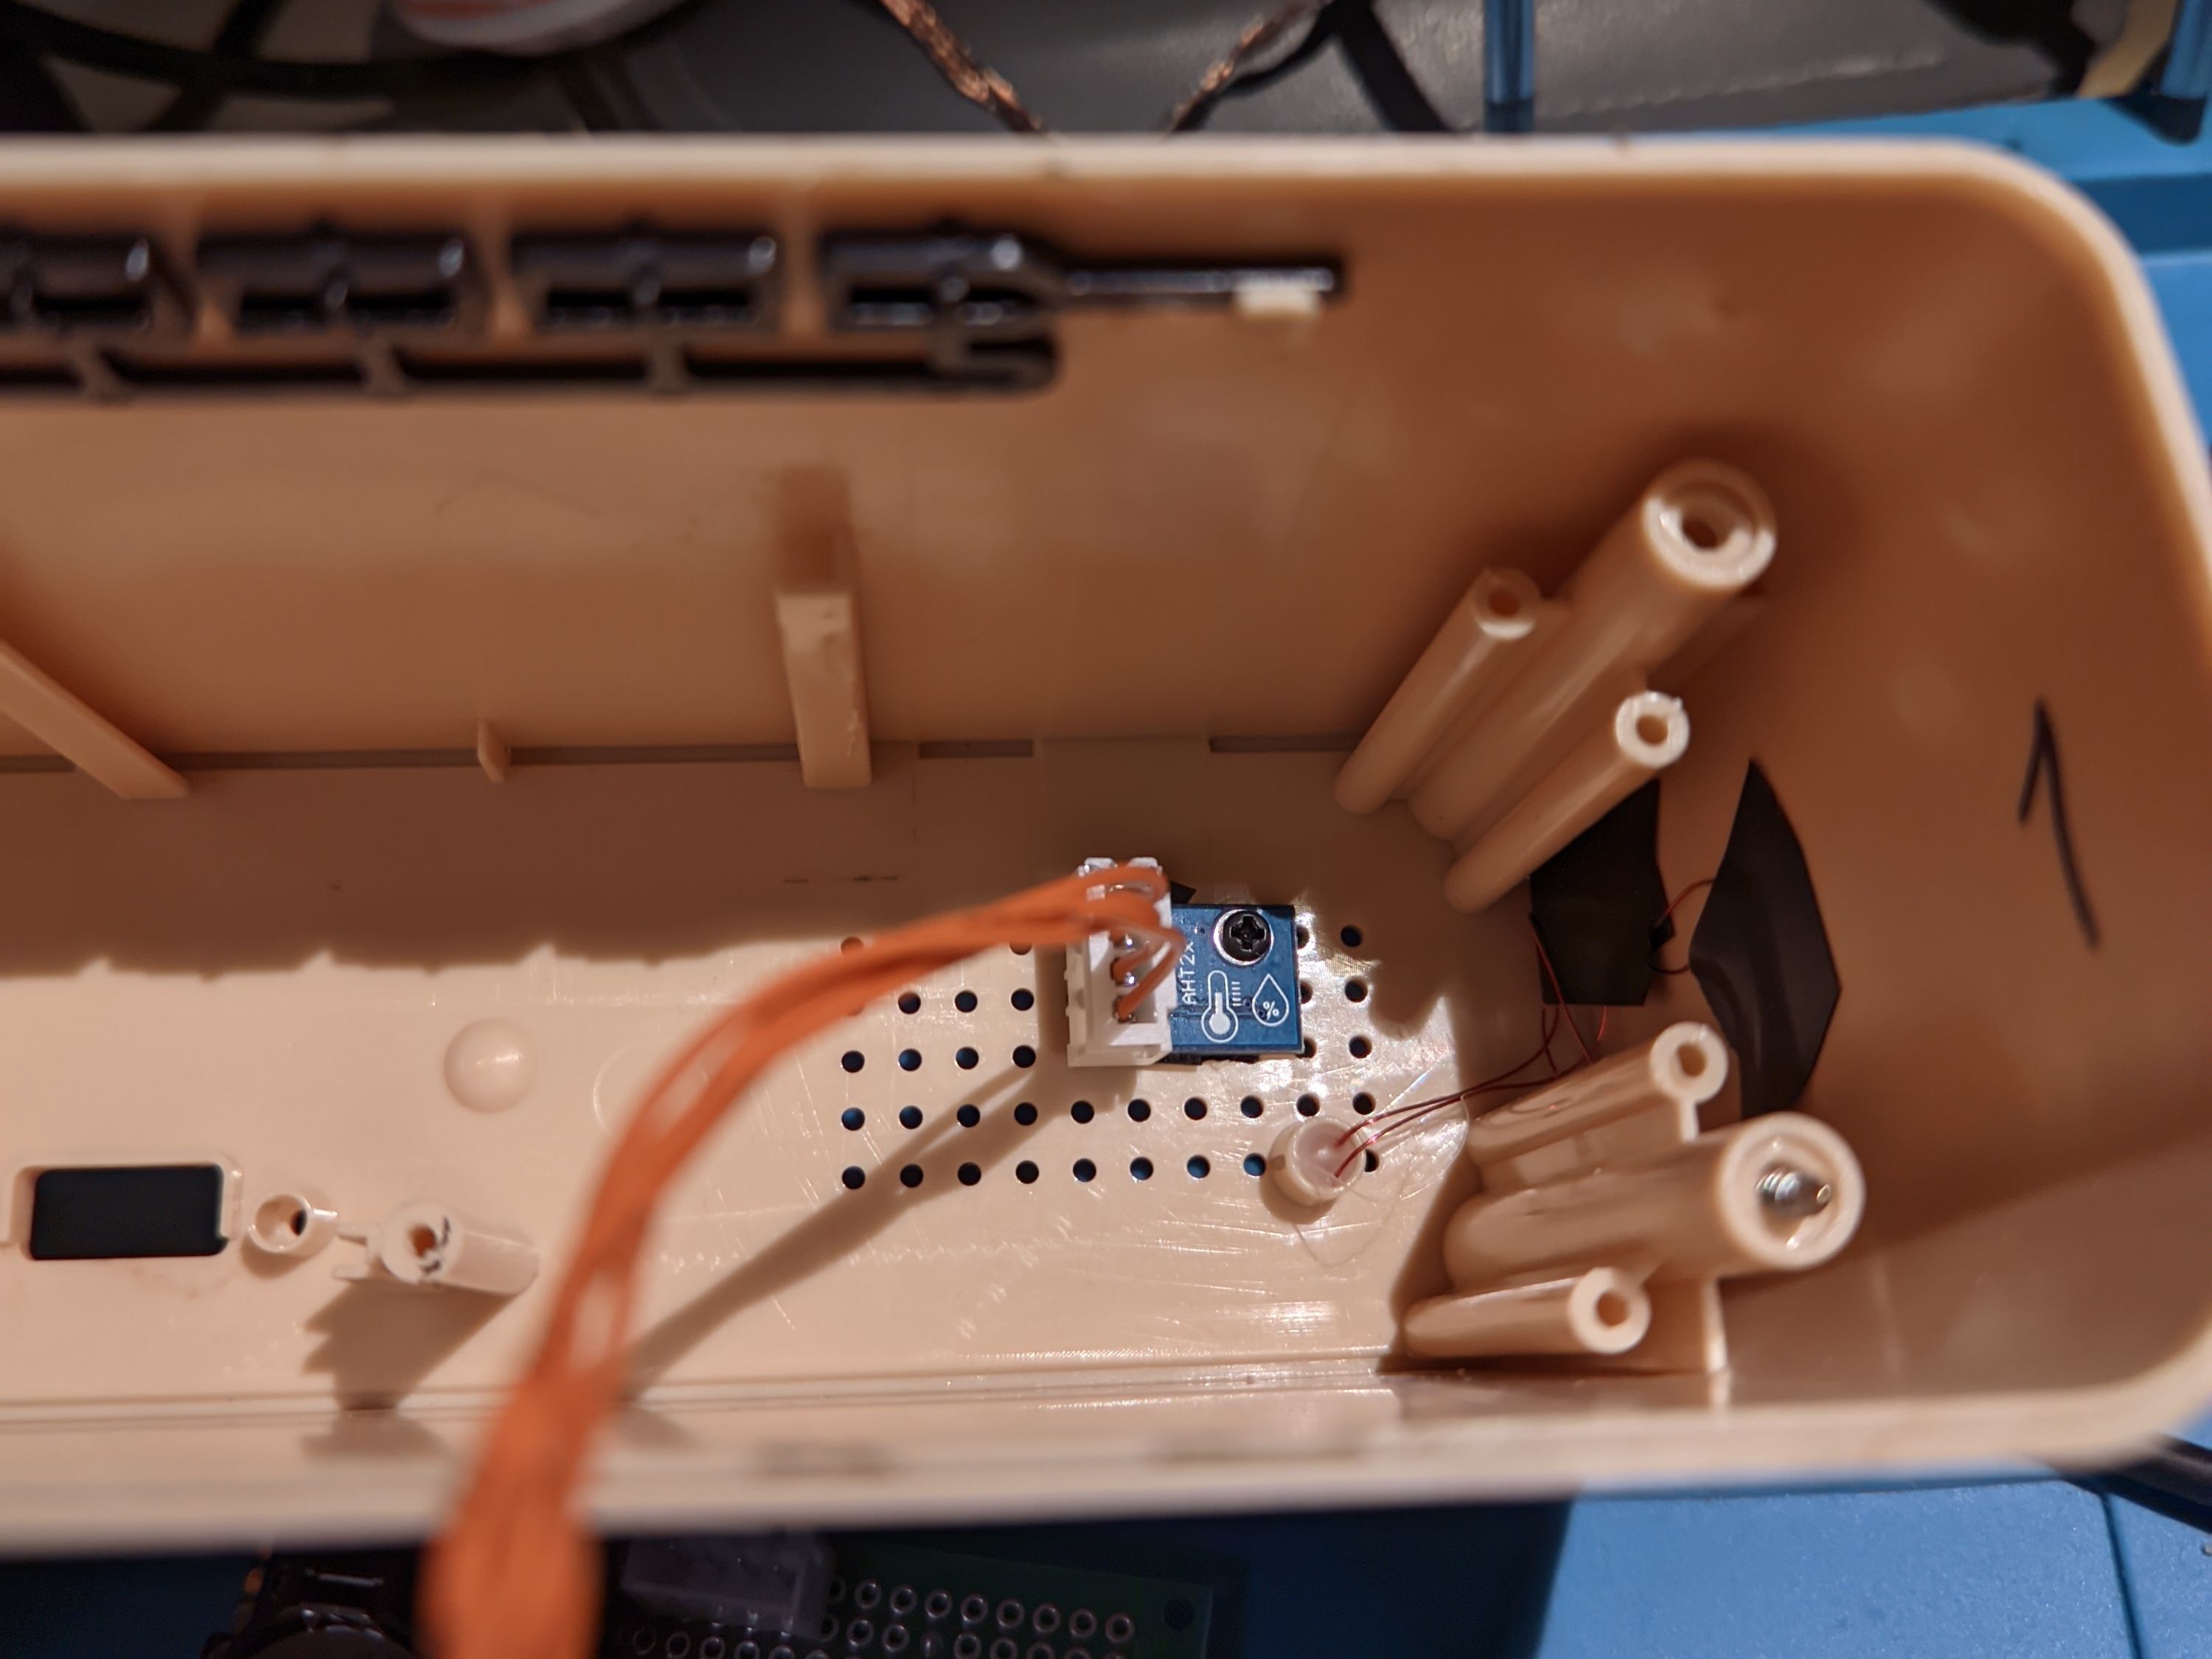 A look inside the opened case with a small blue board attached to the back